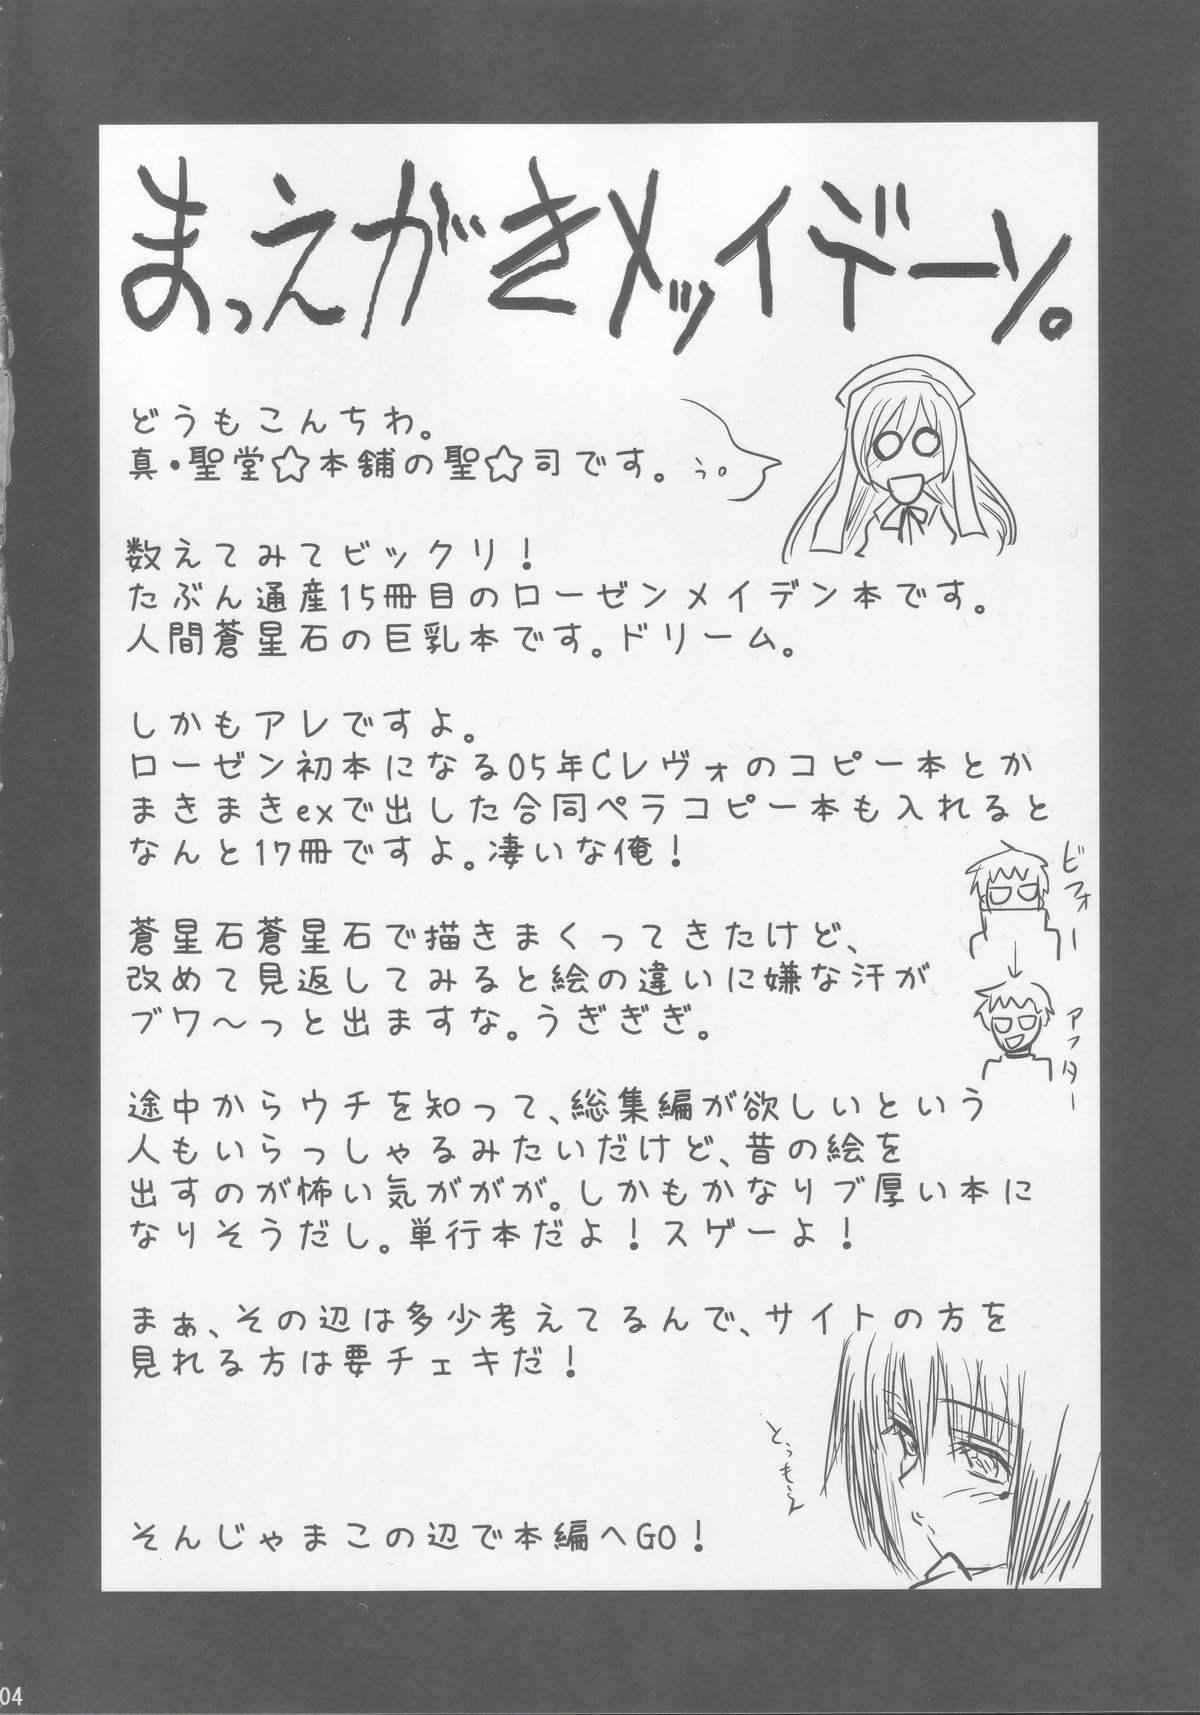 Playing Kyo Ao - Rozen maiden Strapon - Page 3